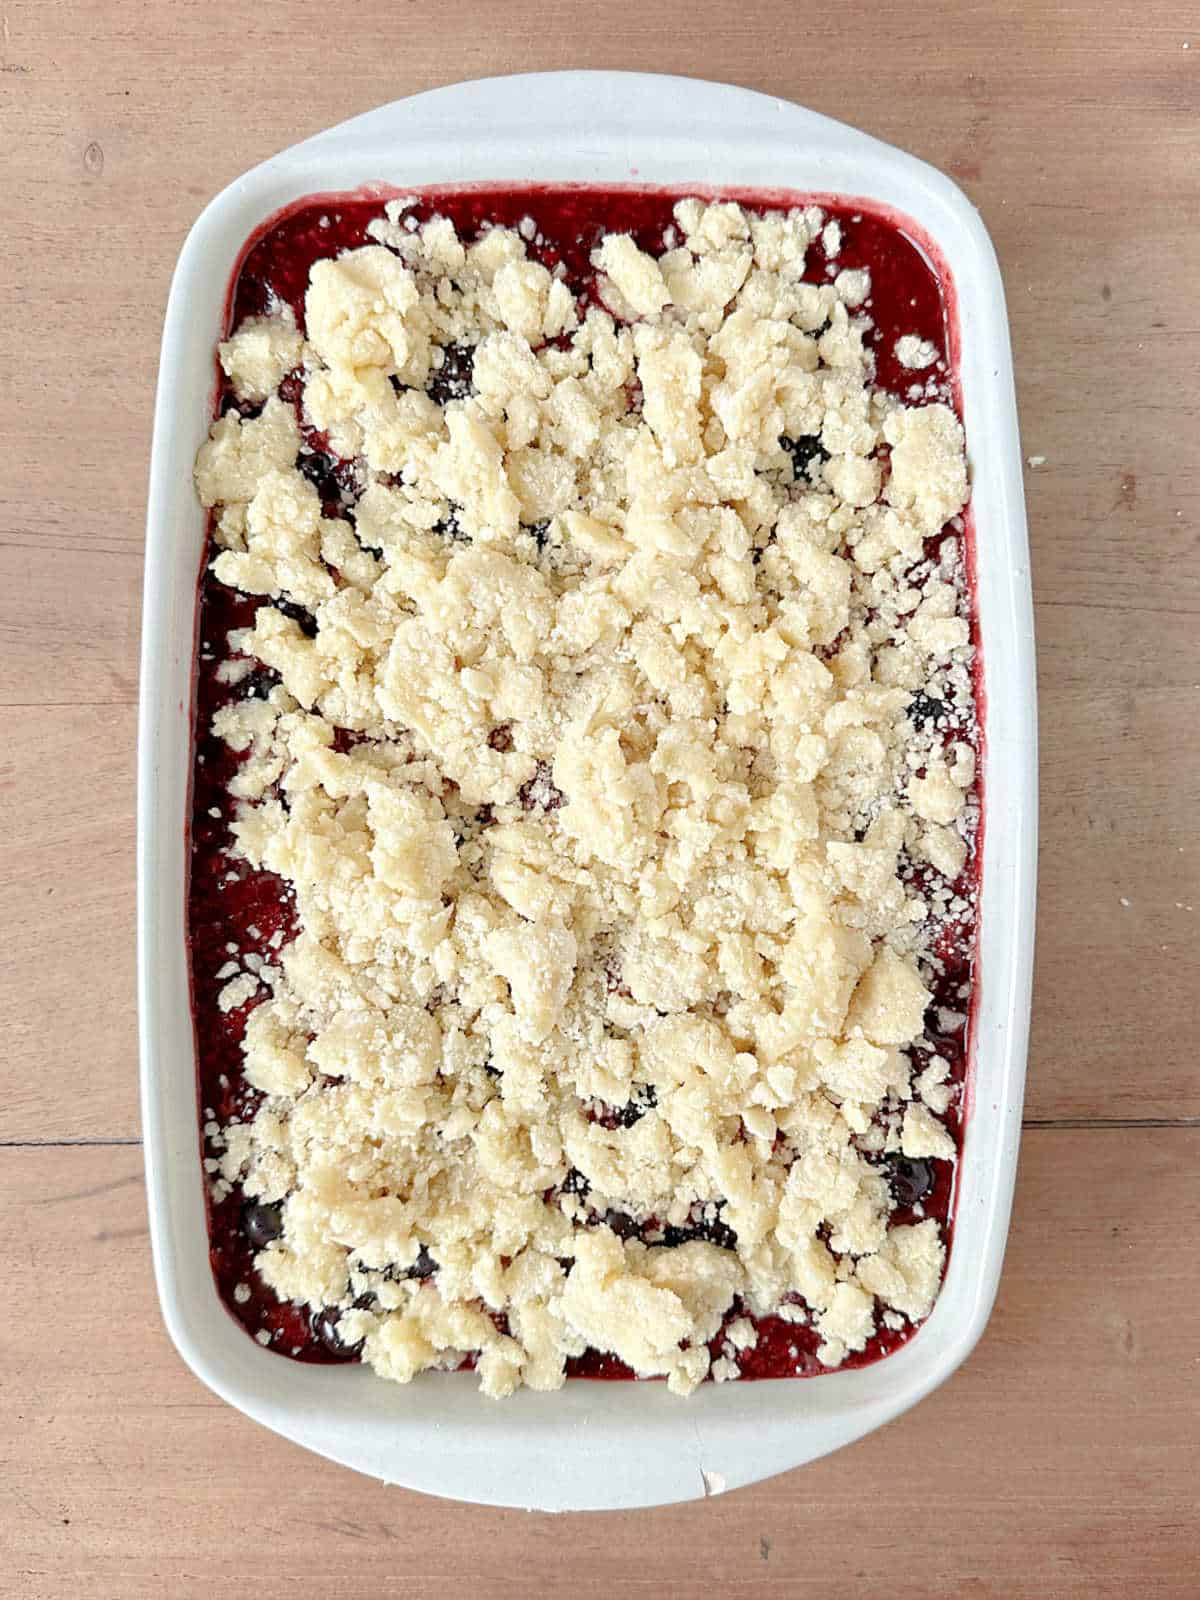 Rectangular baking dish with berry dump cake before baking on a wooden table.